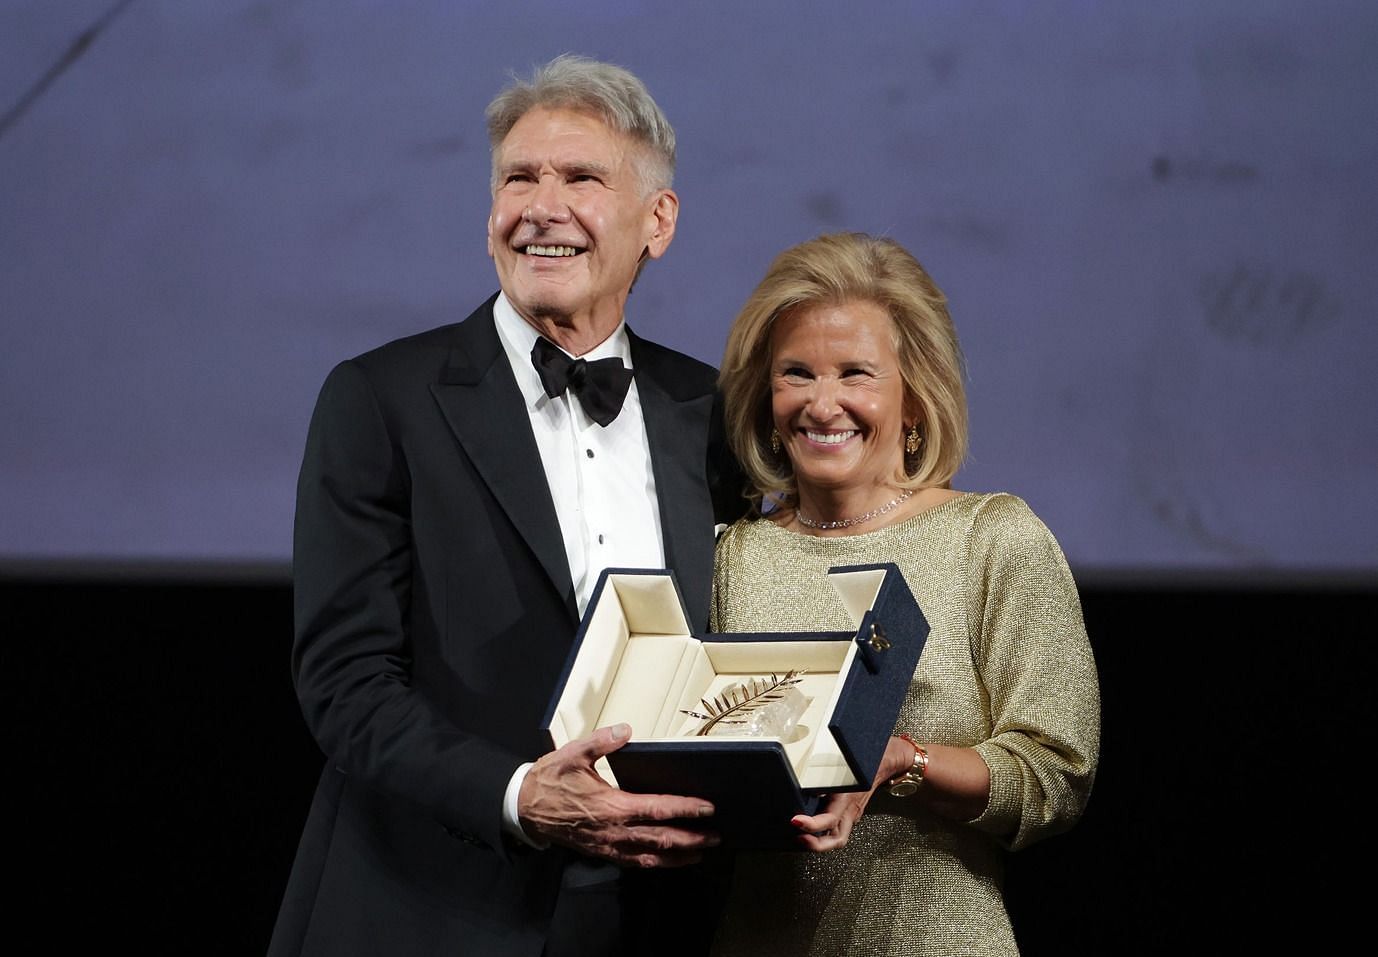 Harrison Ford receives honorary Palme d